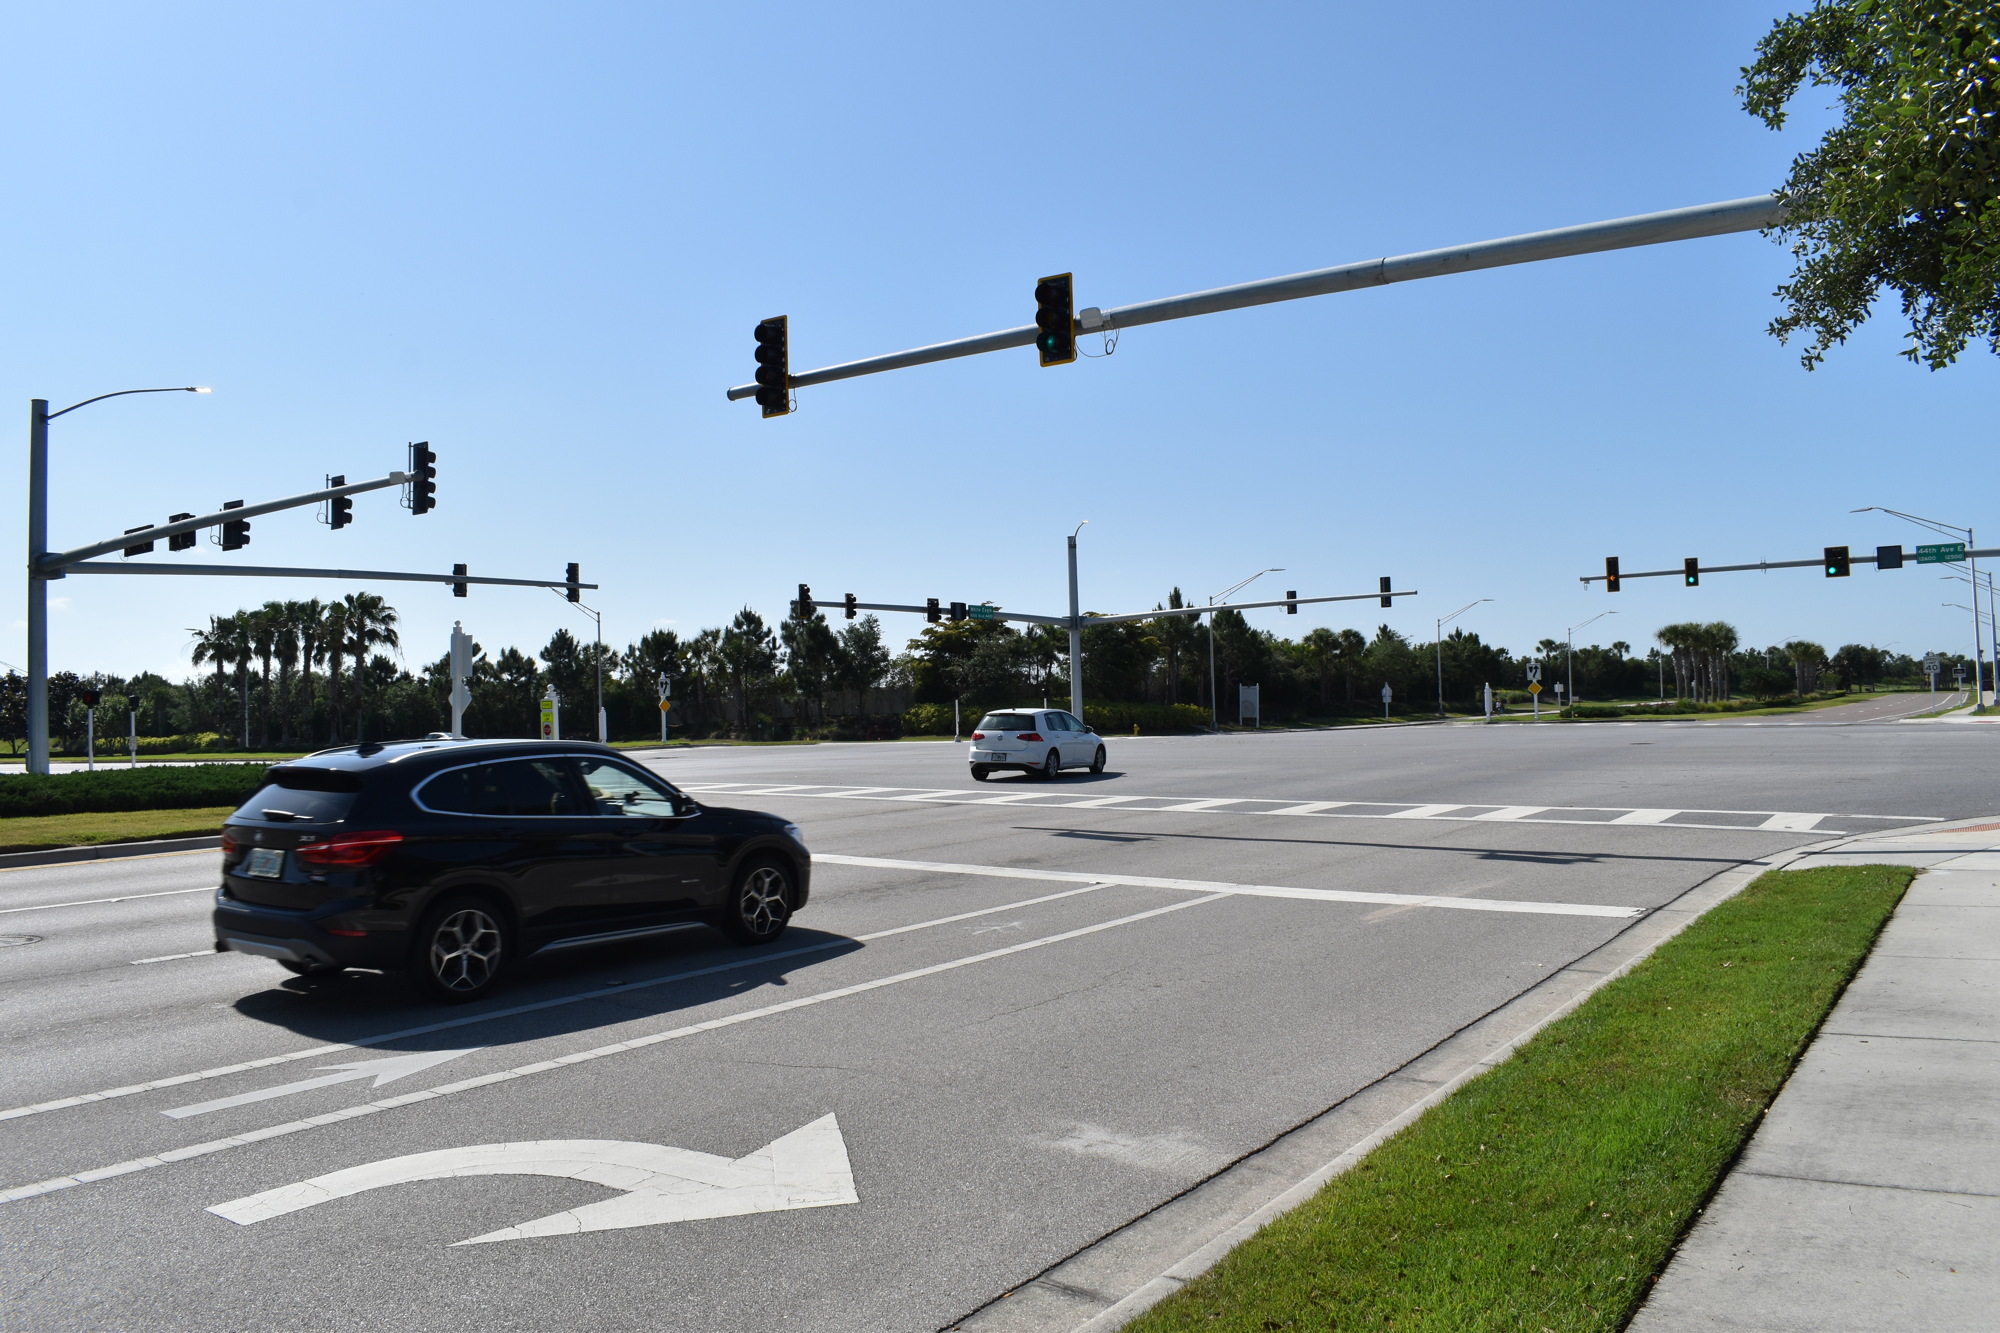 The intersection of 44th Avenue and White Eagle Boulevard in Lakewood Ranch utilizes Leading Pedestrian Intervals and Adaptive Signal Control Technology.